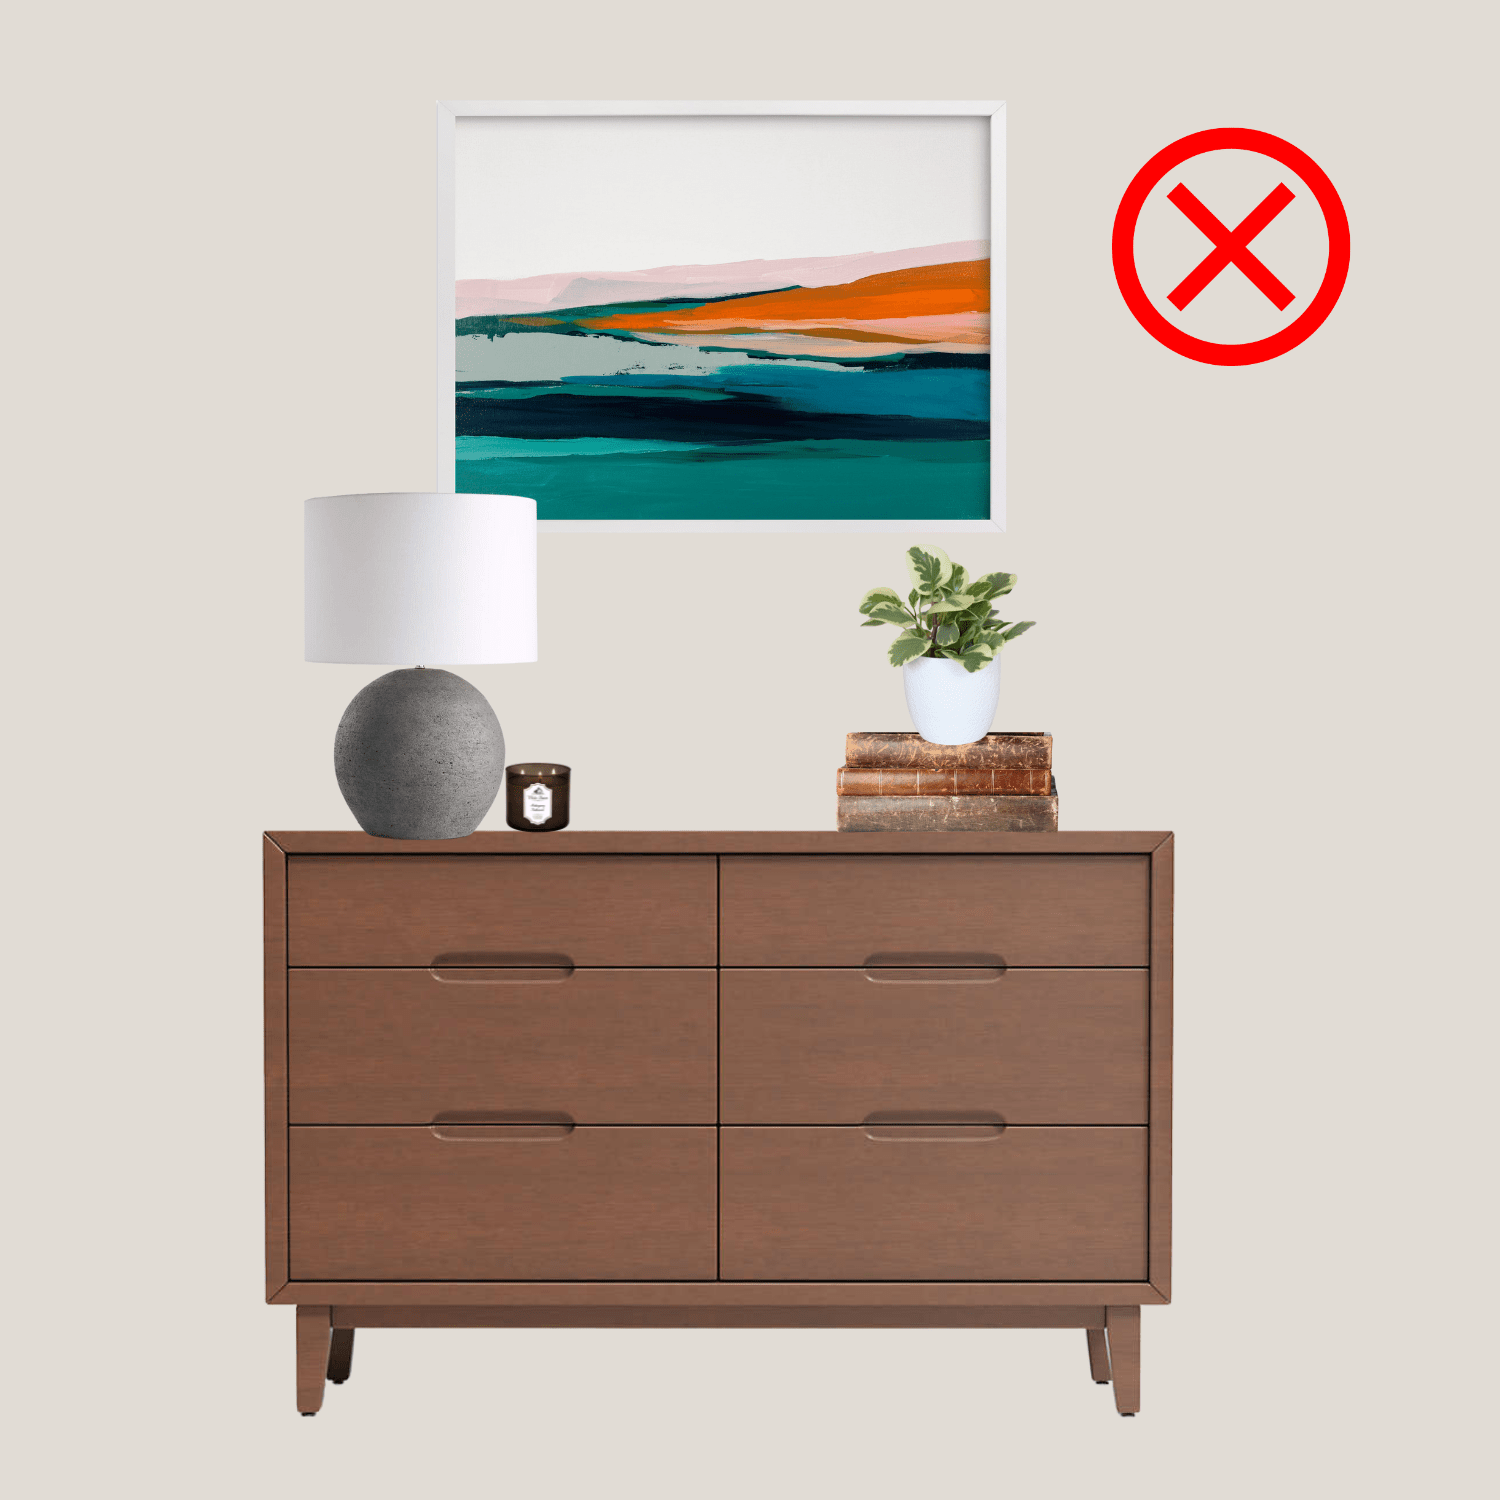 a common home design mistake - hanging art way too high